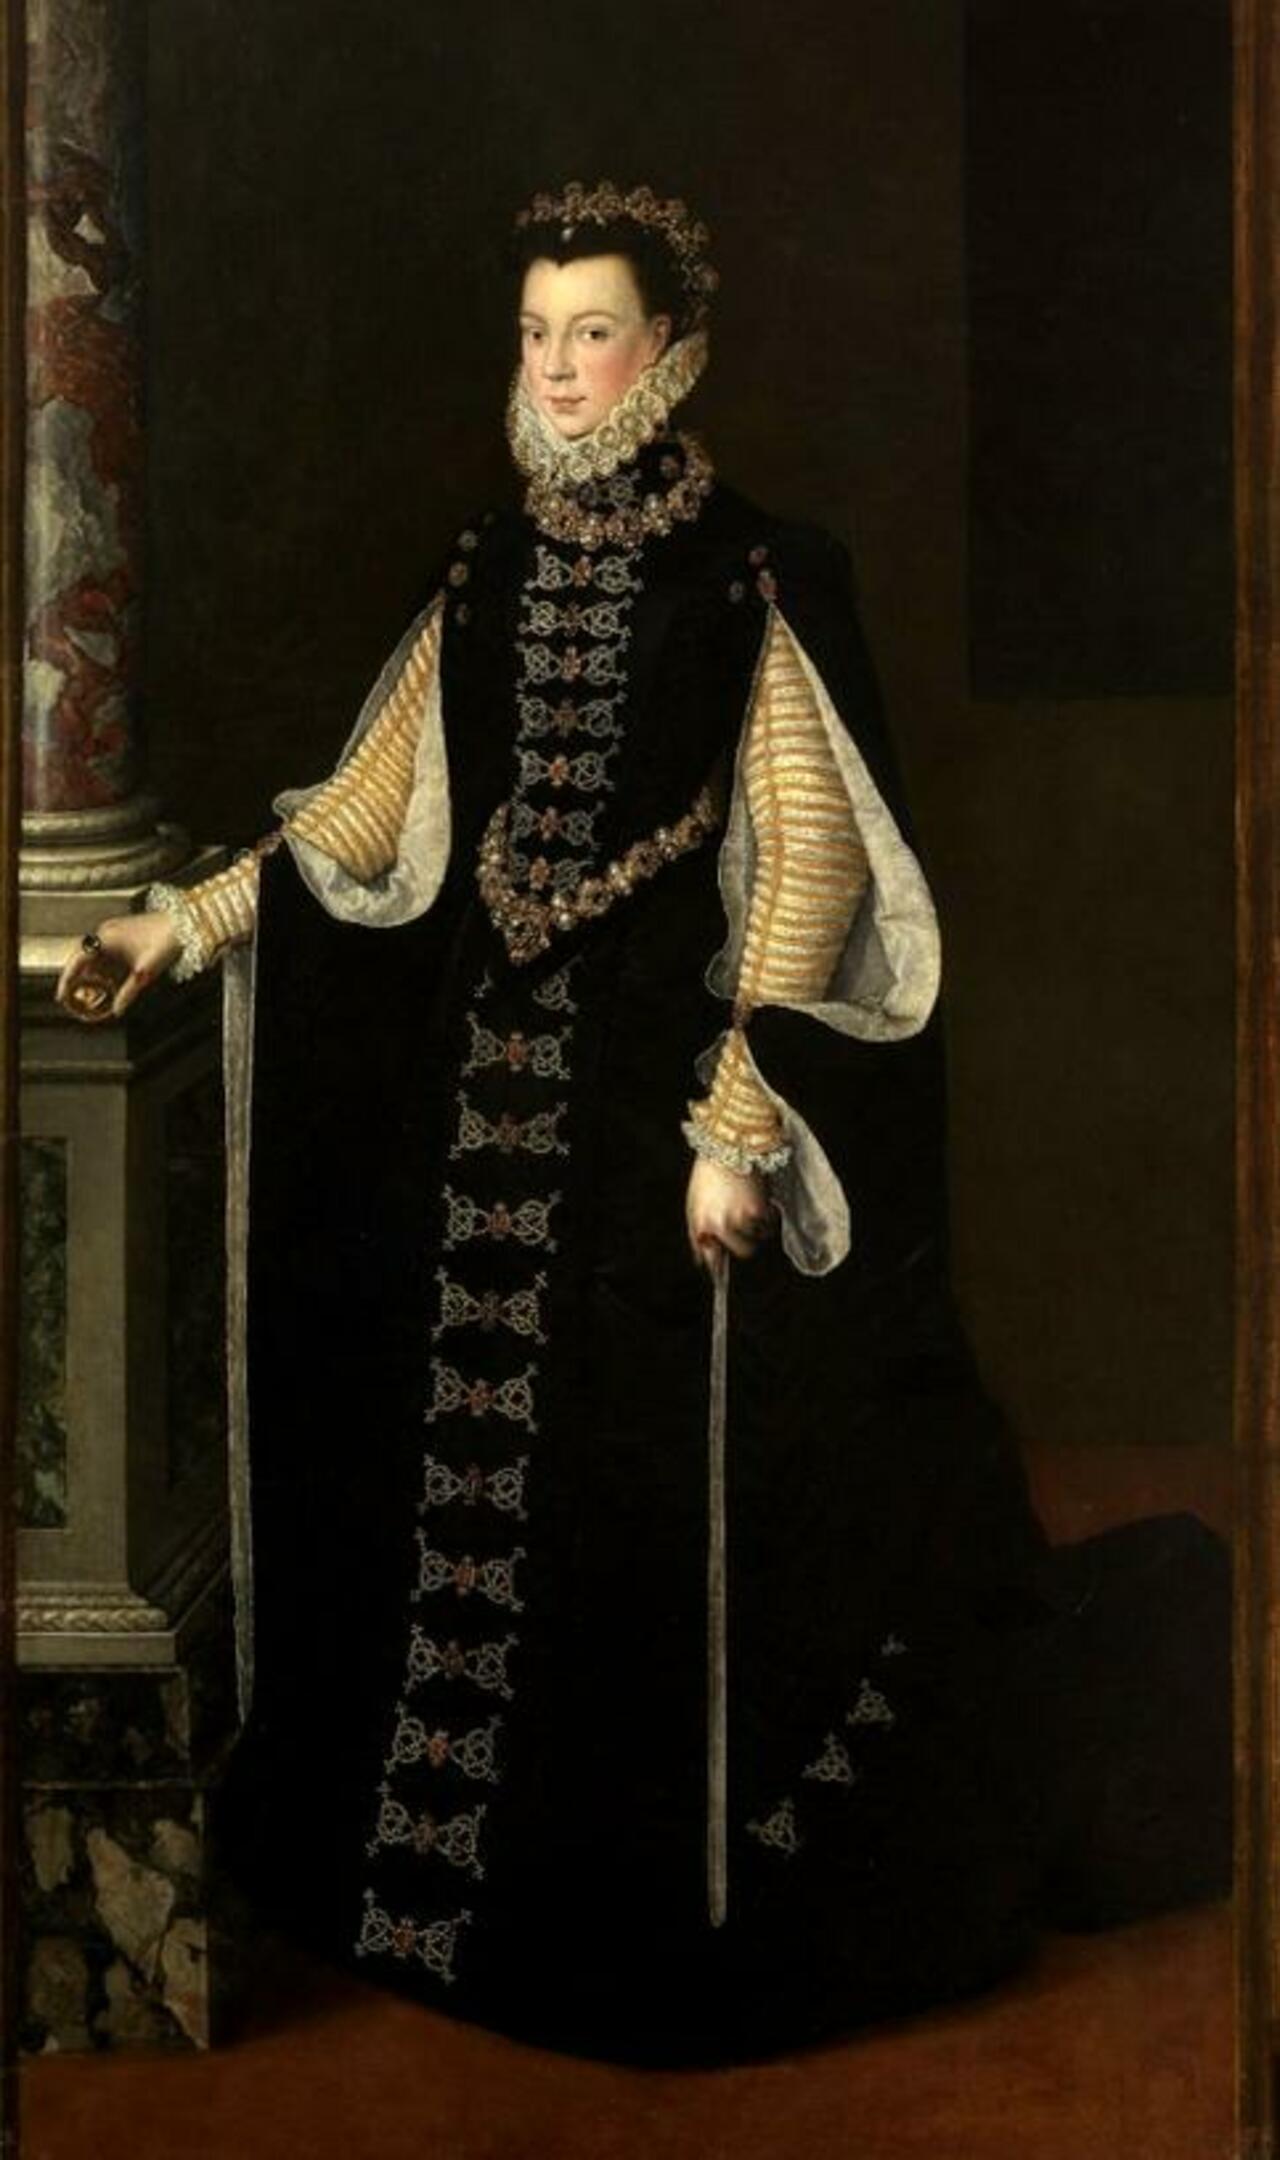 Portrait of Elisabeth of Valois (1545-1568), Queen consort of Spain. Attributed to Anguissola. Prado, Madrid. #Art http://t.co/7c83DO5cPA